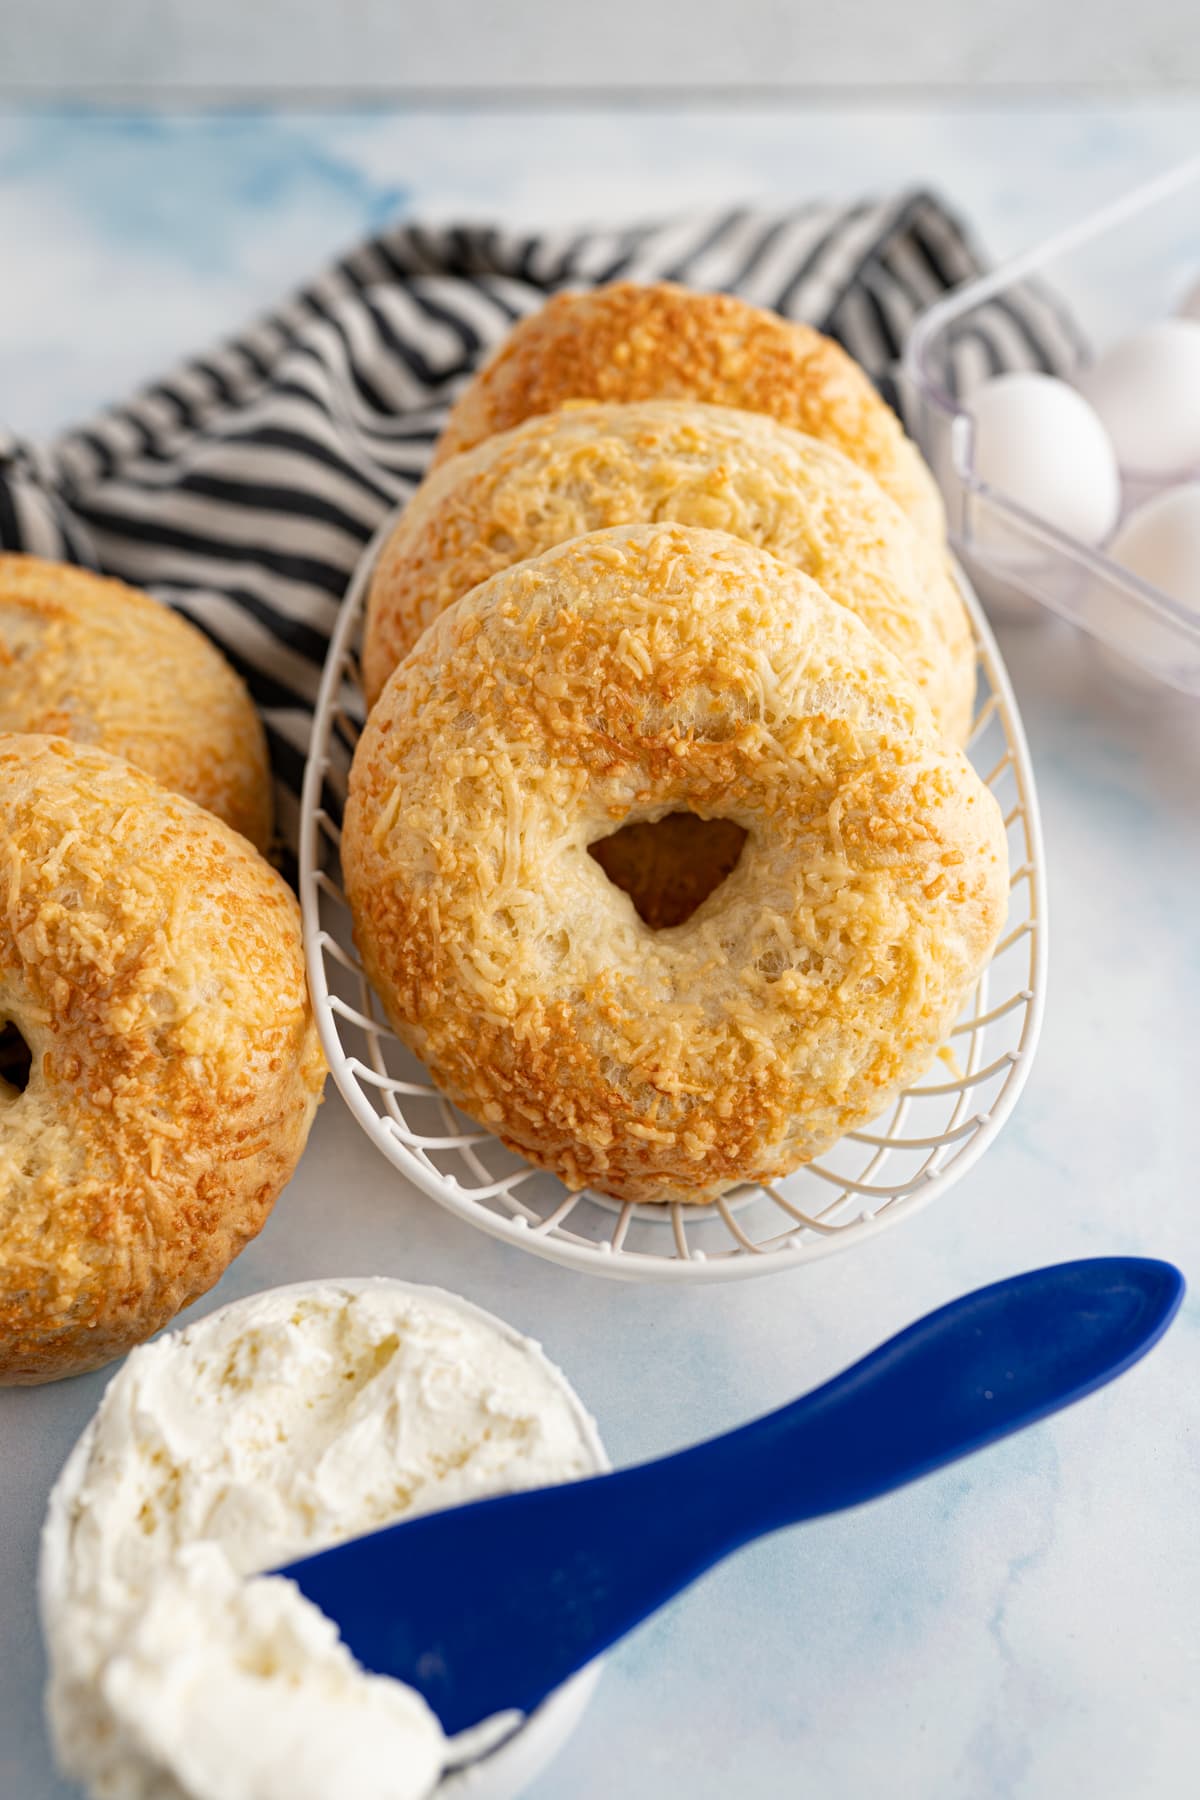 asiago cheese bagels in a wire basket next to some cream cheese and a black and white striped dishtowel. 